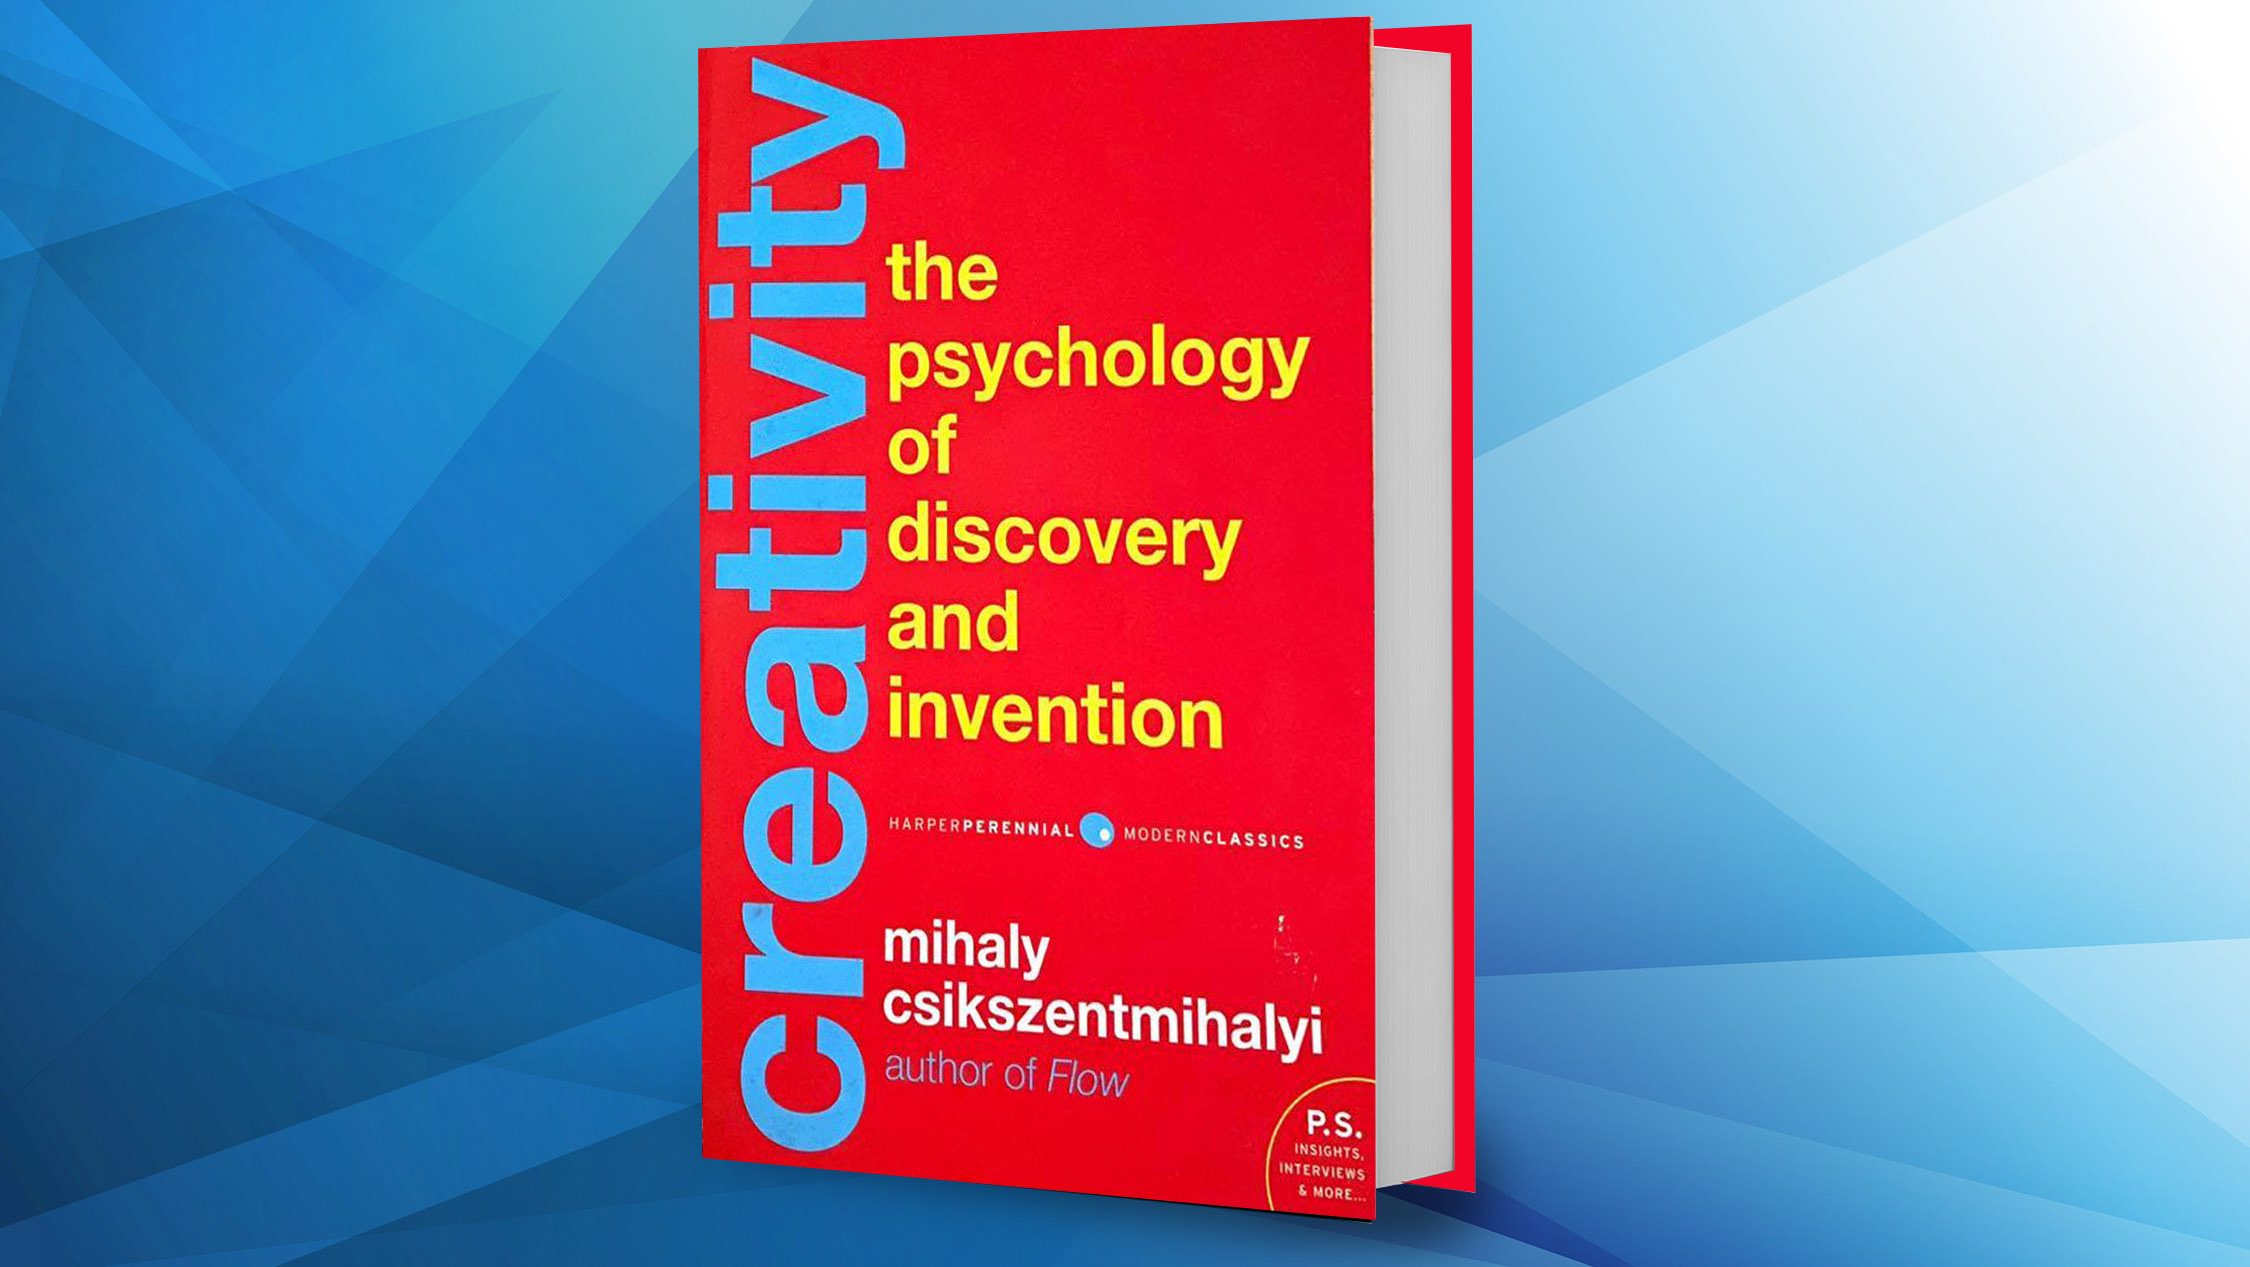 Creativity: Flow and the Psychology of Discovery and Invention